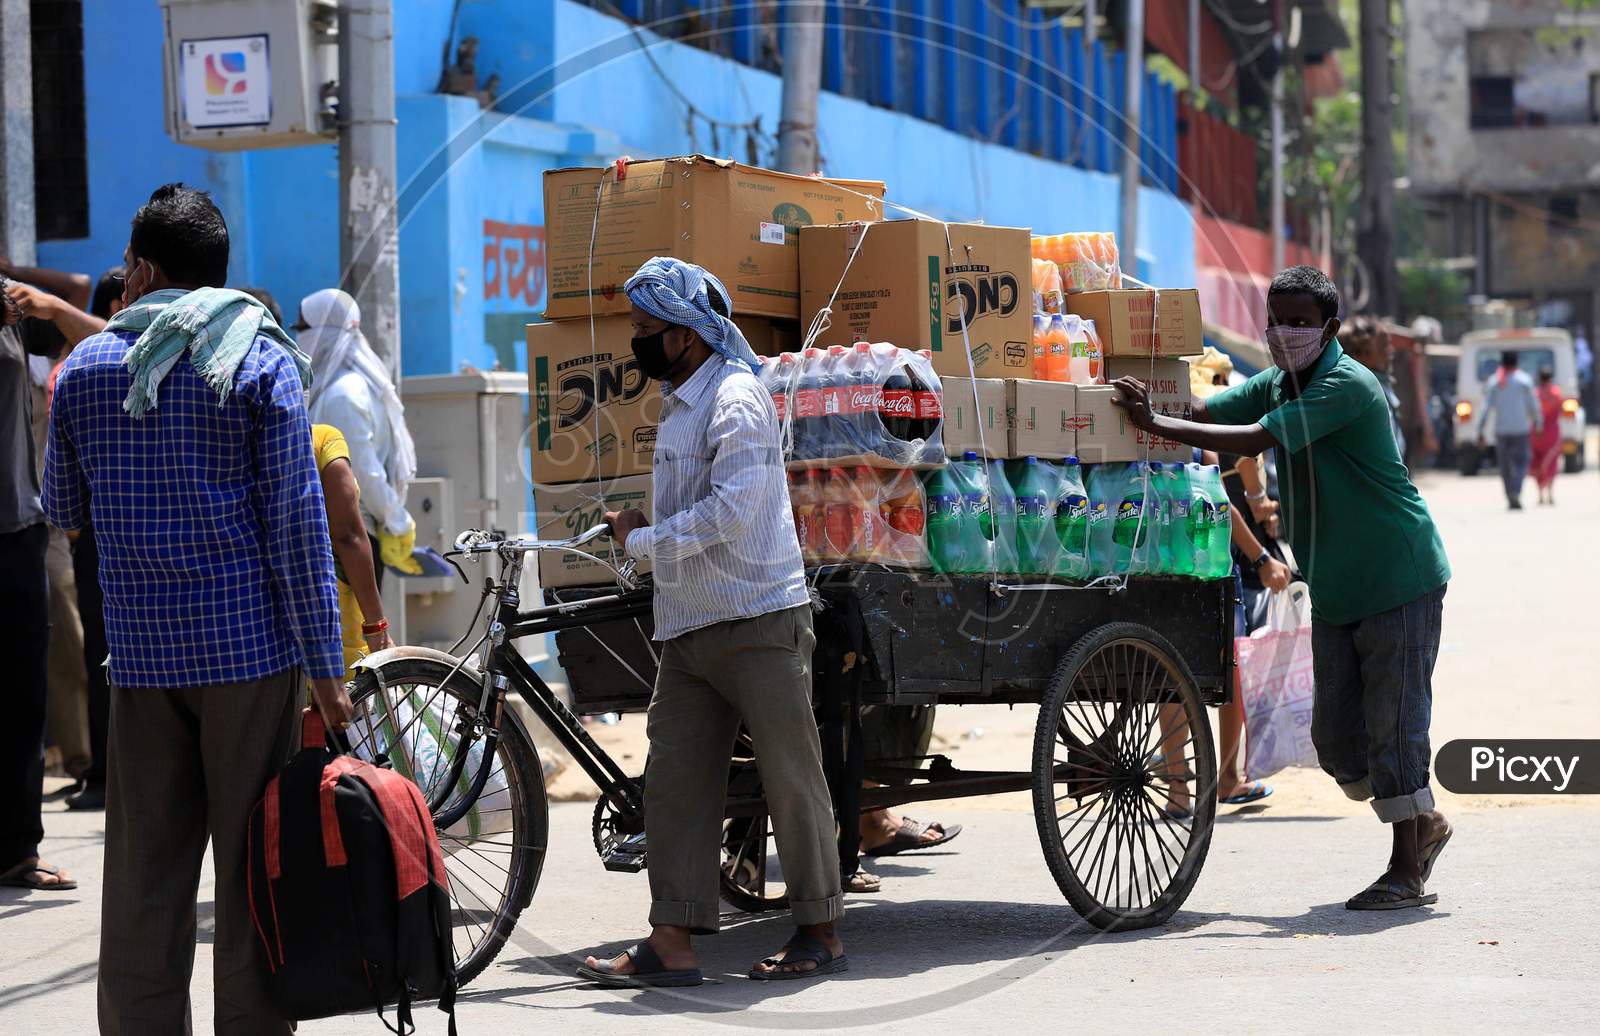 Vendors Transport Cold Drinks On A Trolly On A Hot Summer Day During Extended Nationwide Lockdown Amidst Coronavirus Or COVID-19 Pandemic In Prayagraj, May 25, 2020.